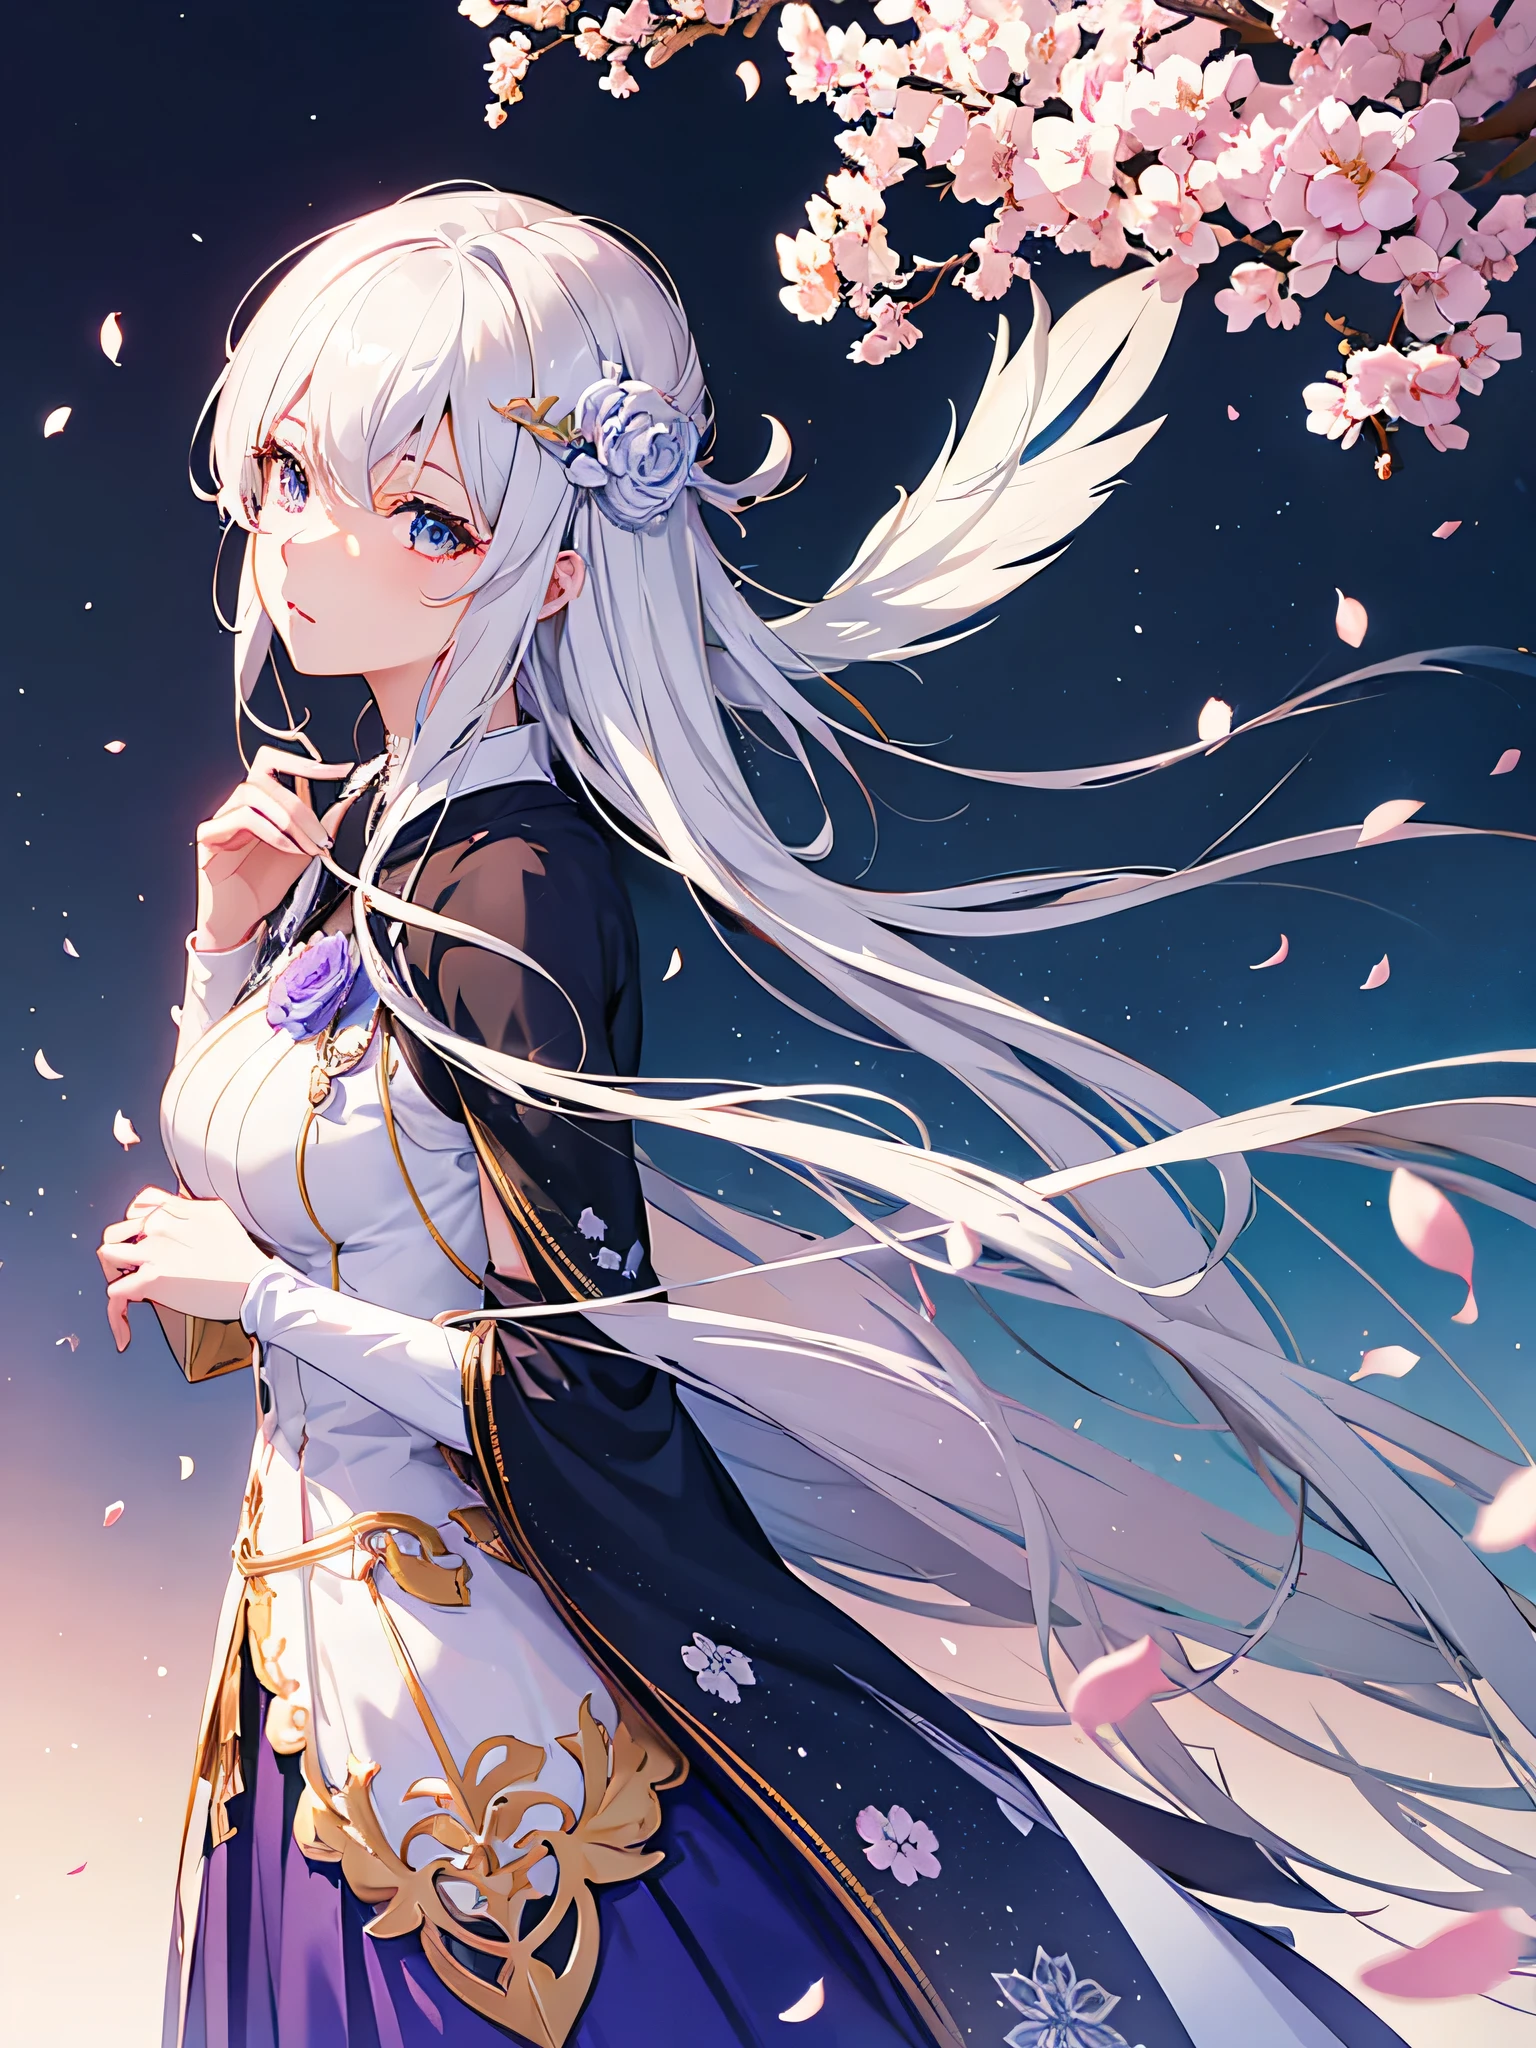 anime girl with umbrella and flowers in her hair, guweiz, detailed anime artwork, clean detailed anime art, detailed digital anime art, detailed anime art, beautiful anime portrait, beautiful anime girl, beautiful anime artwork, artwork in the style of guweiz, beautiful anime art, beautiful anime style, detailed portrait of anime girl, anime girl, beautiful anime, anime illustration